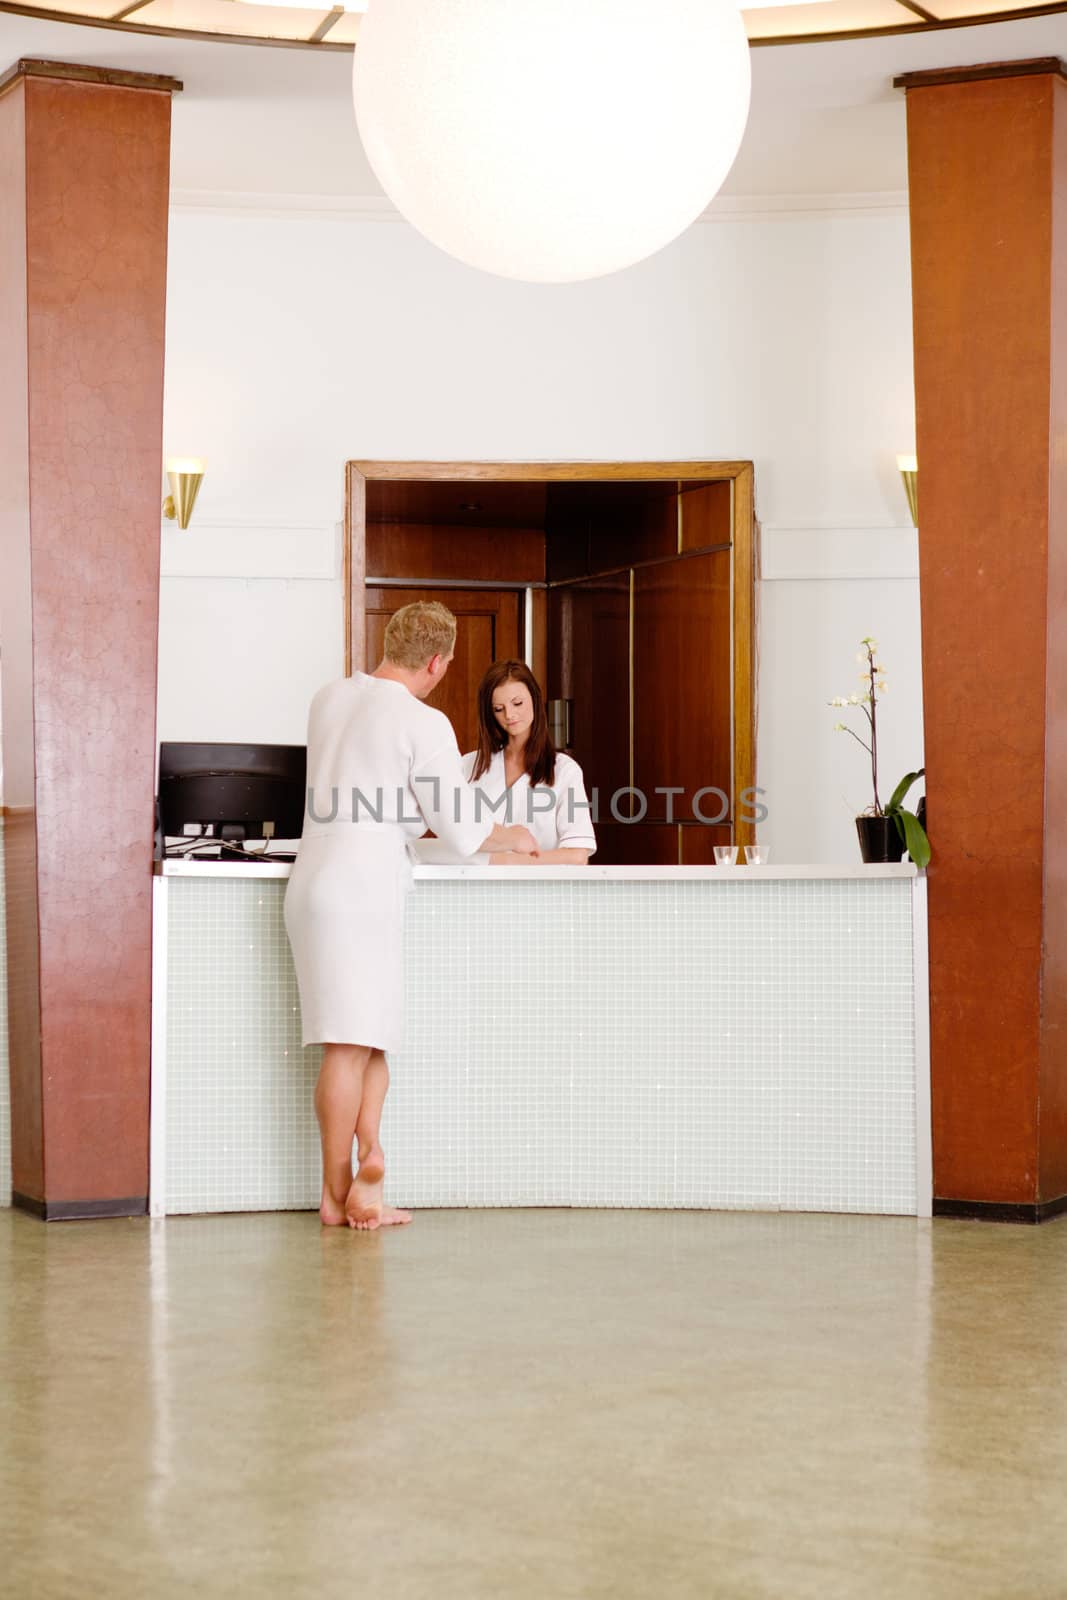 A functionalism (funkis) spa interior with a man choosing a therapy package